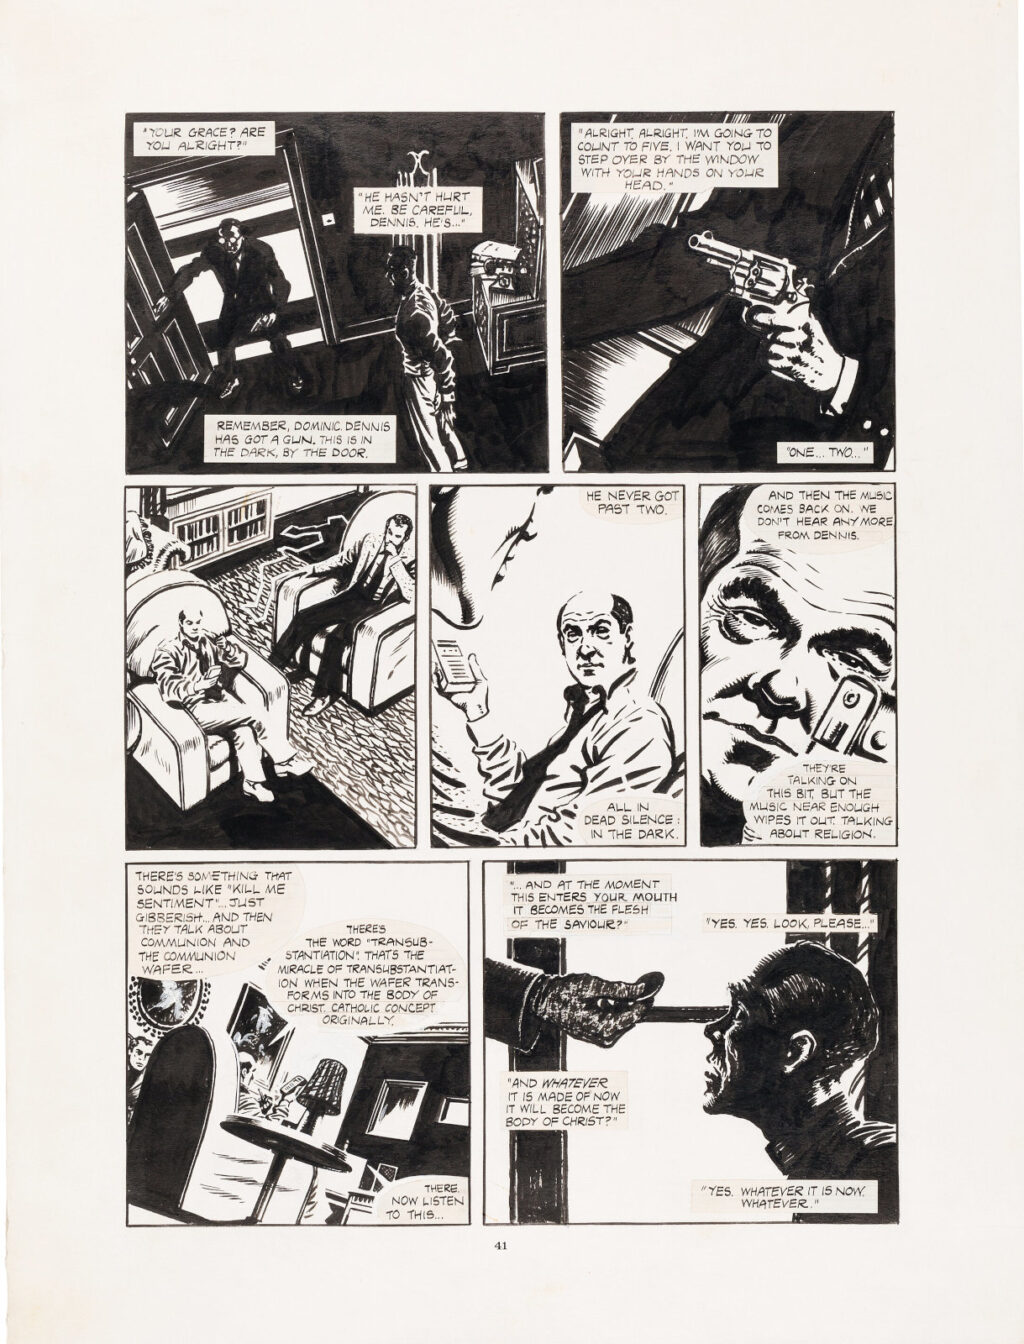 Warrior issue 8 V For Vendetta page 7 by David Lloyd